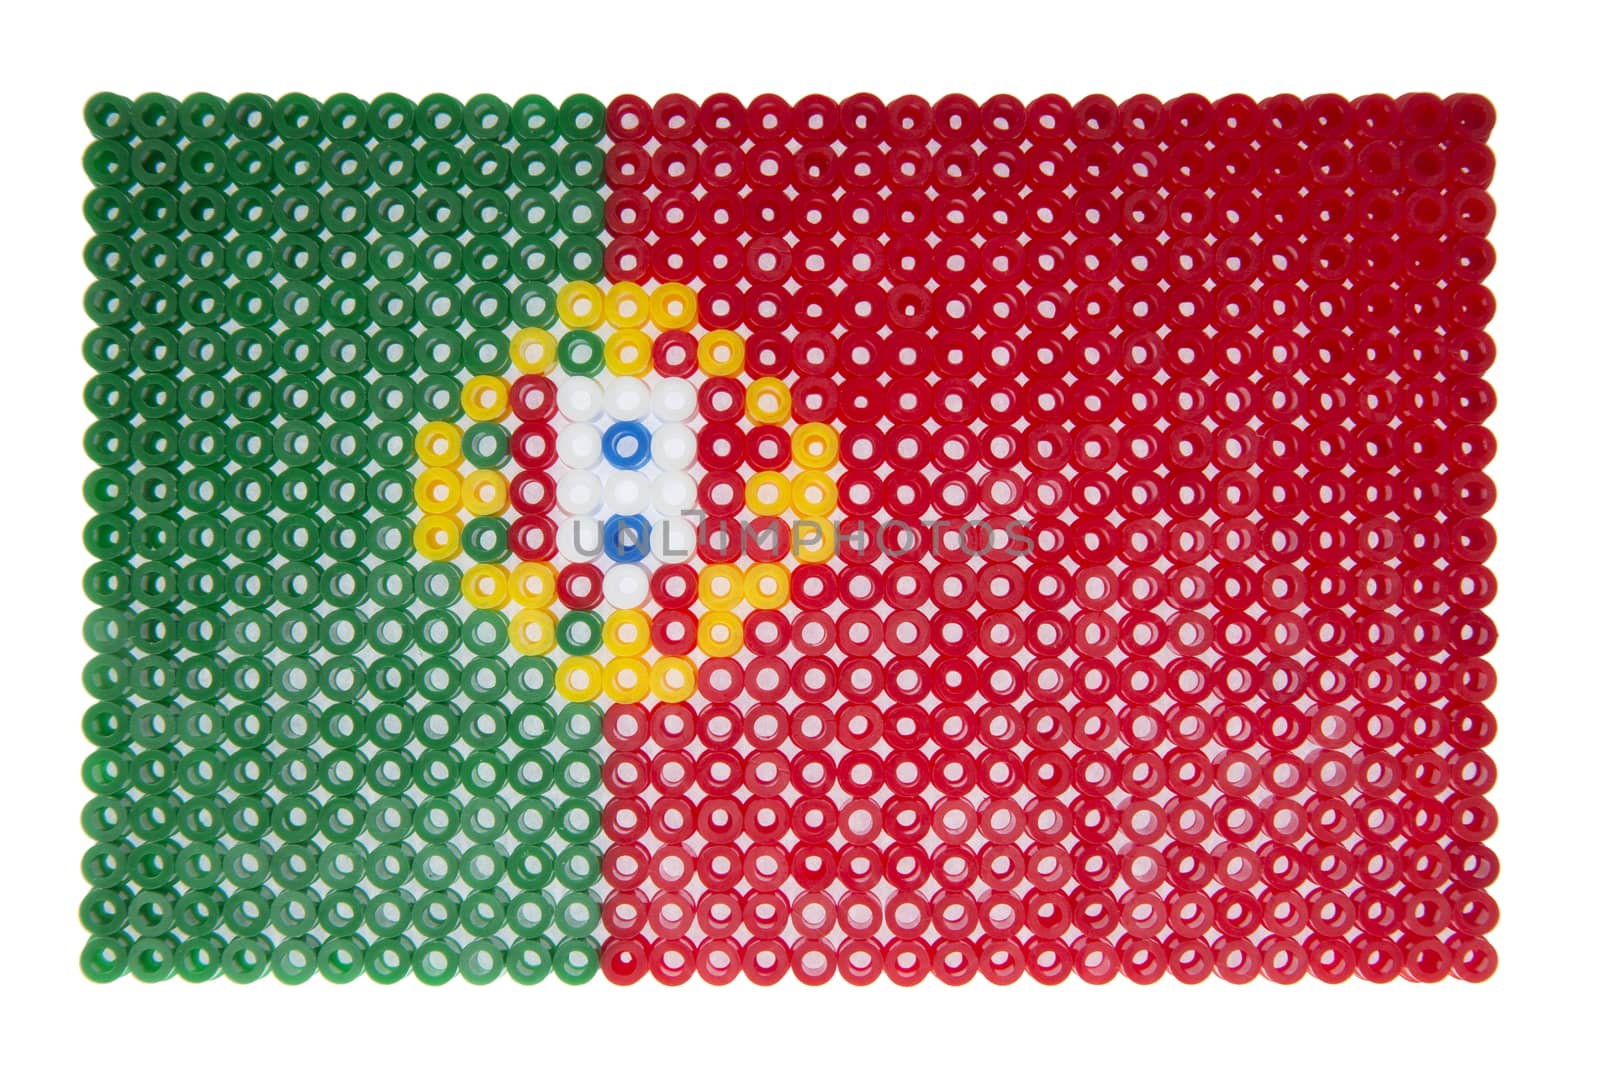 Portuguese Flag made of plastic pearls